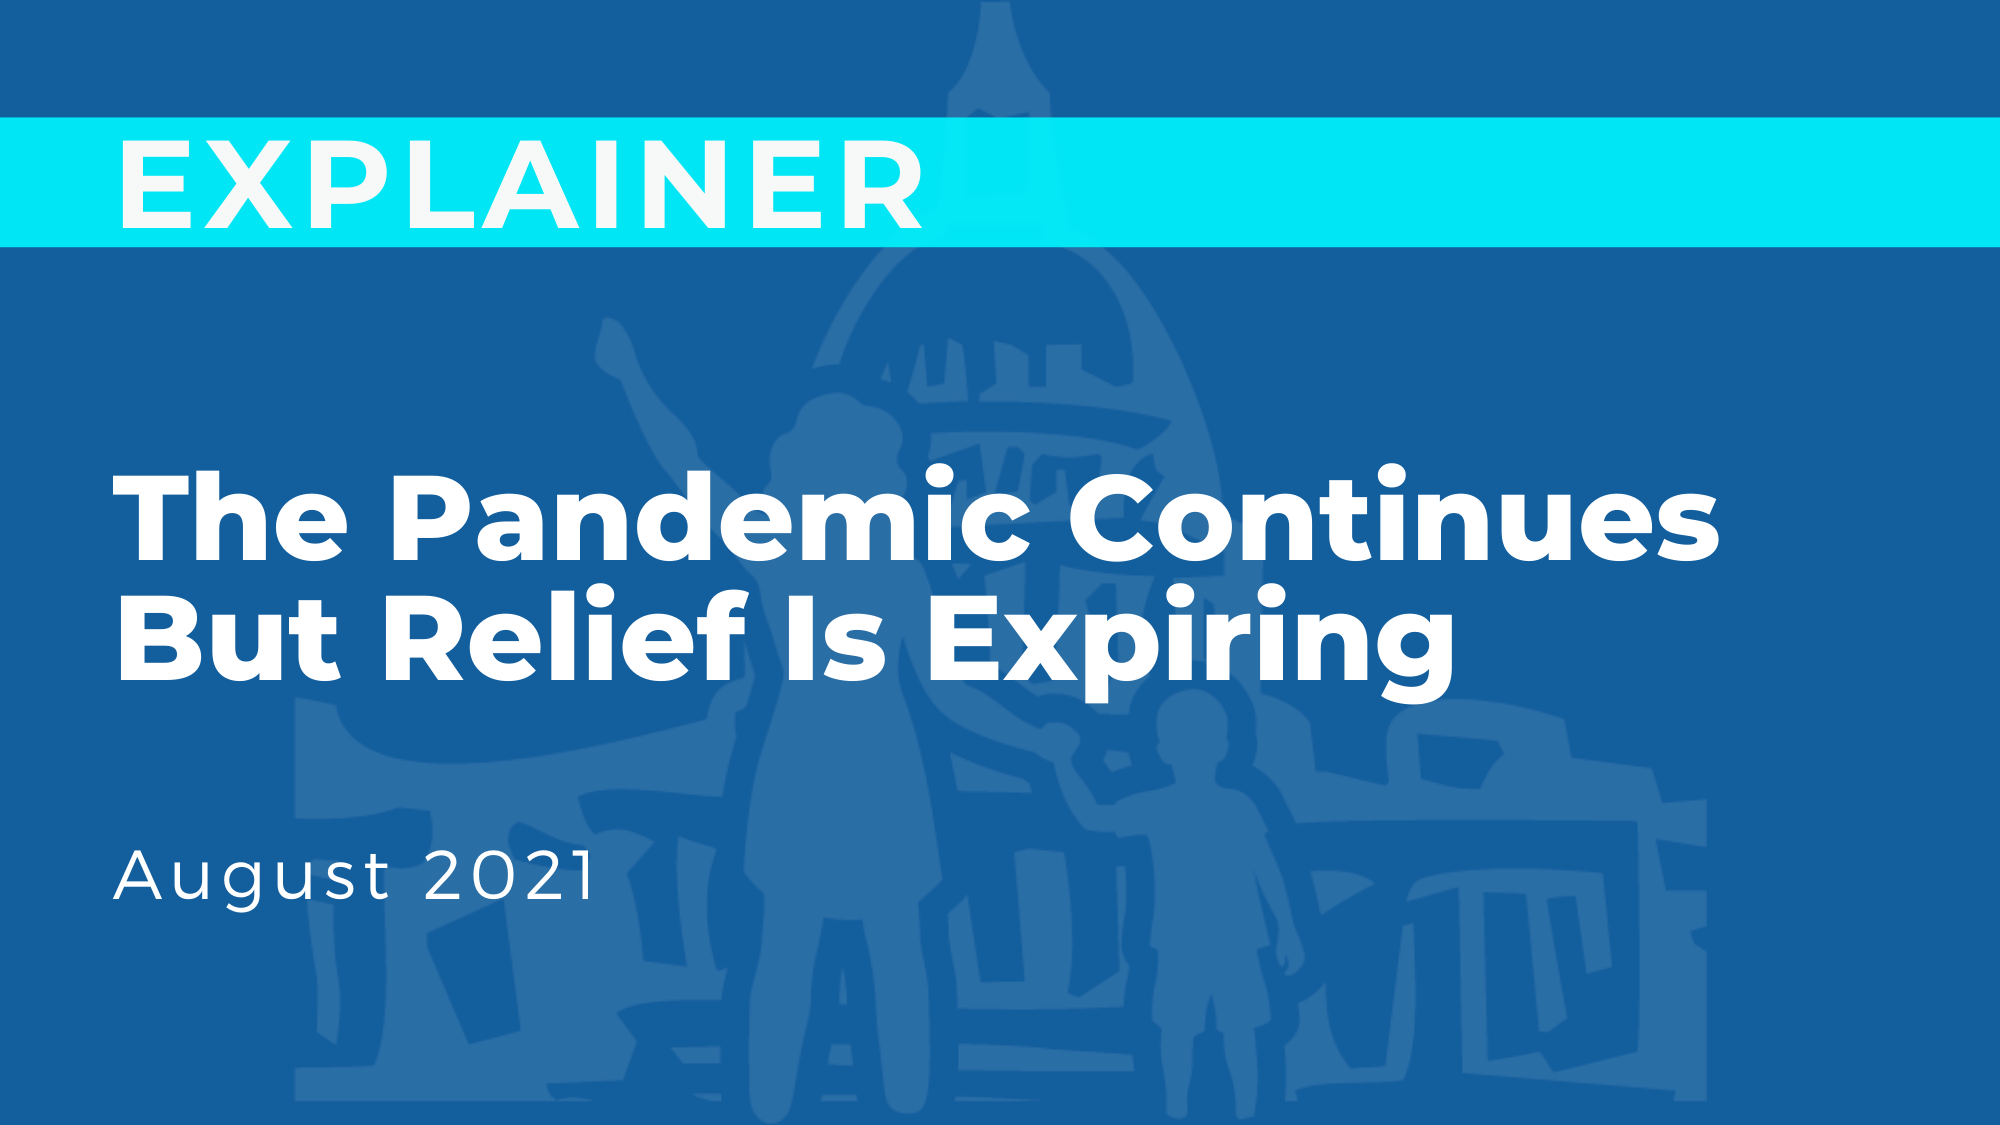 The Pandemic Continues But Relief is Expiring